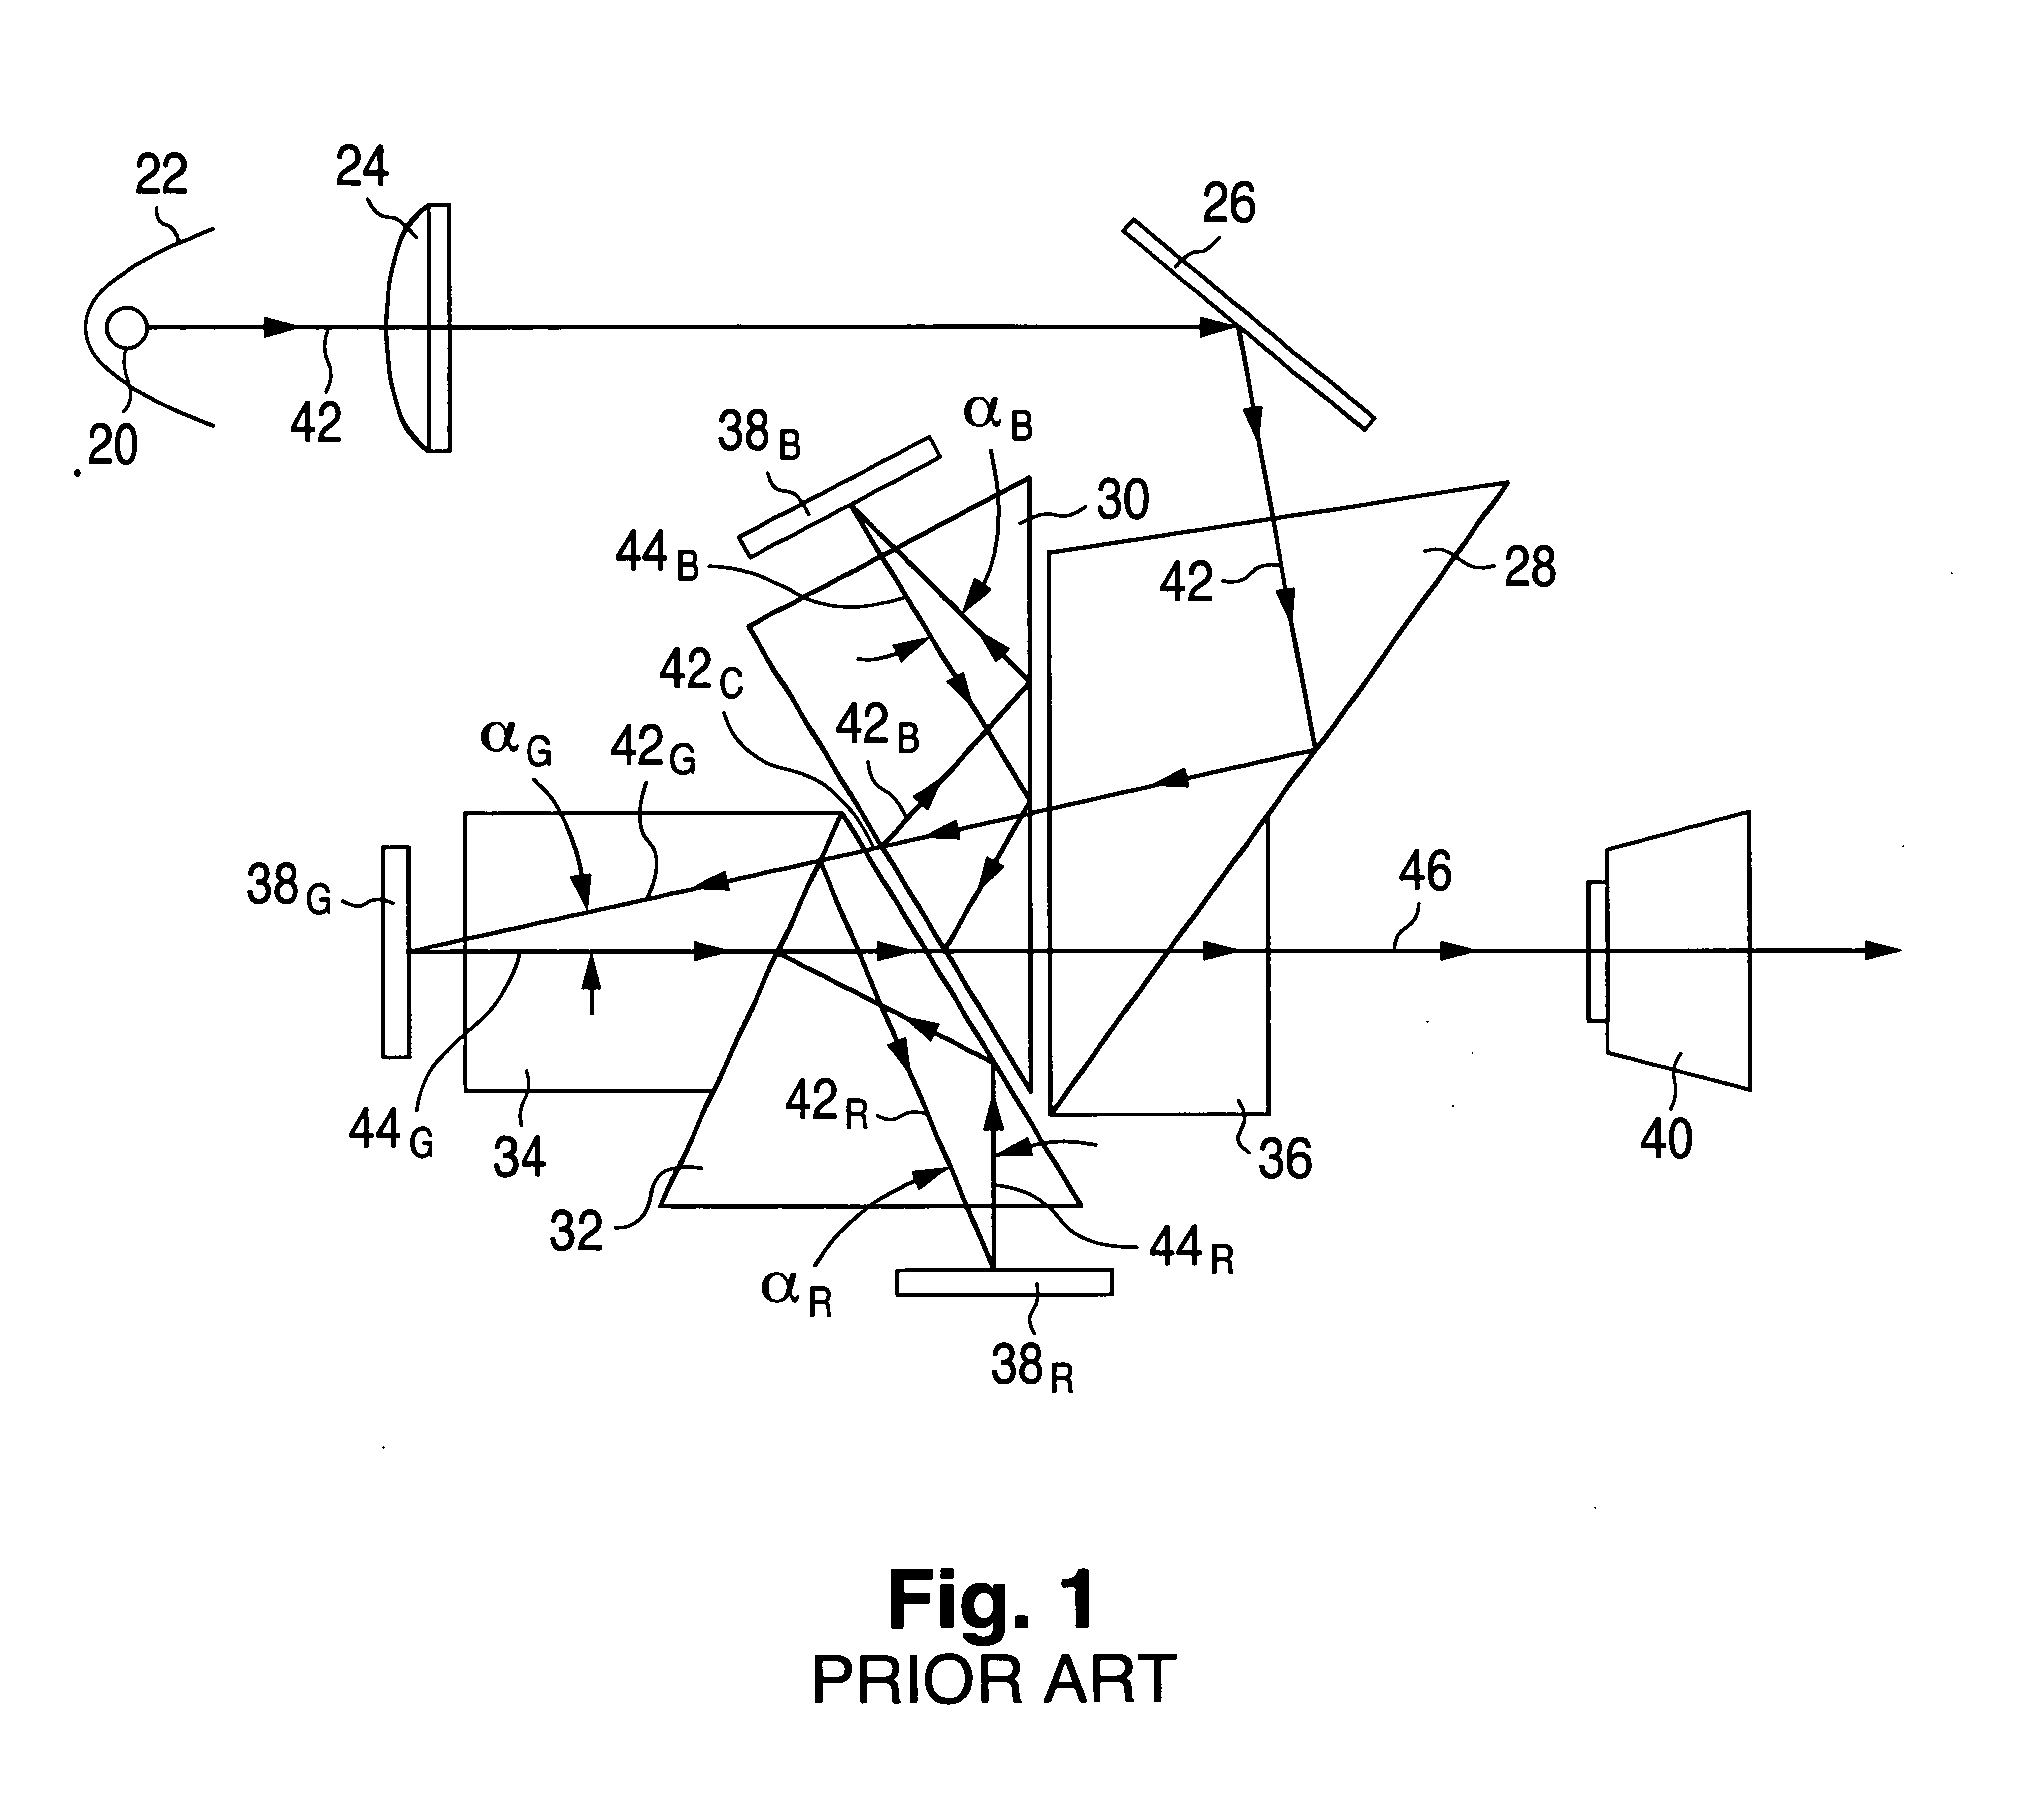 Multi-panel color projector using multiple light-emitting diodes as light sources